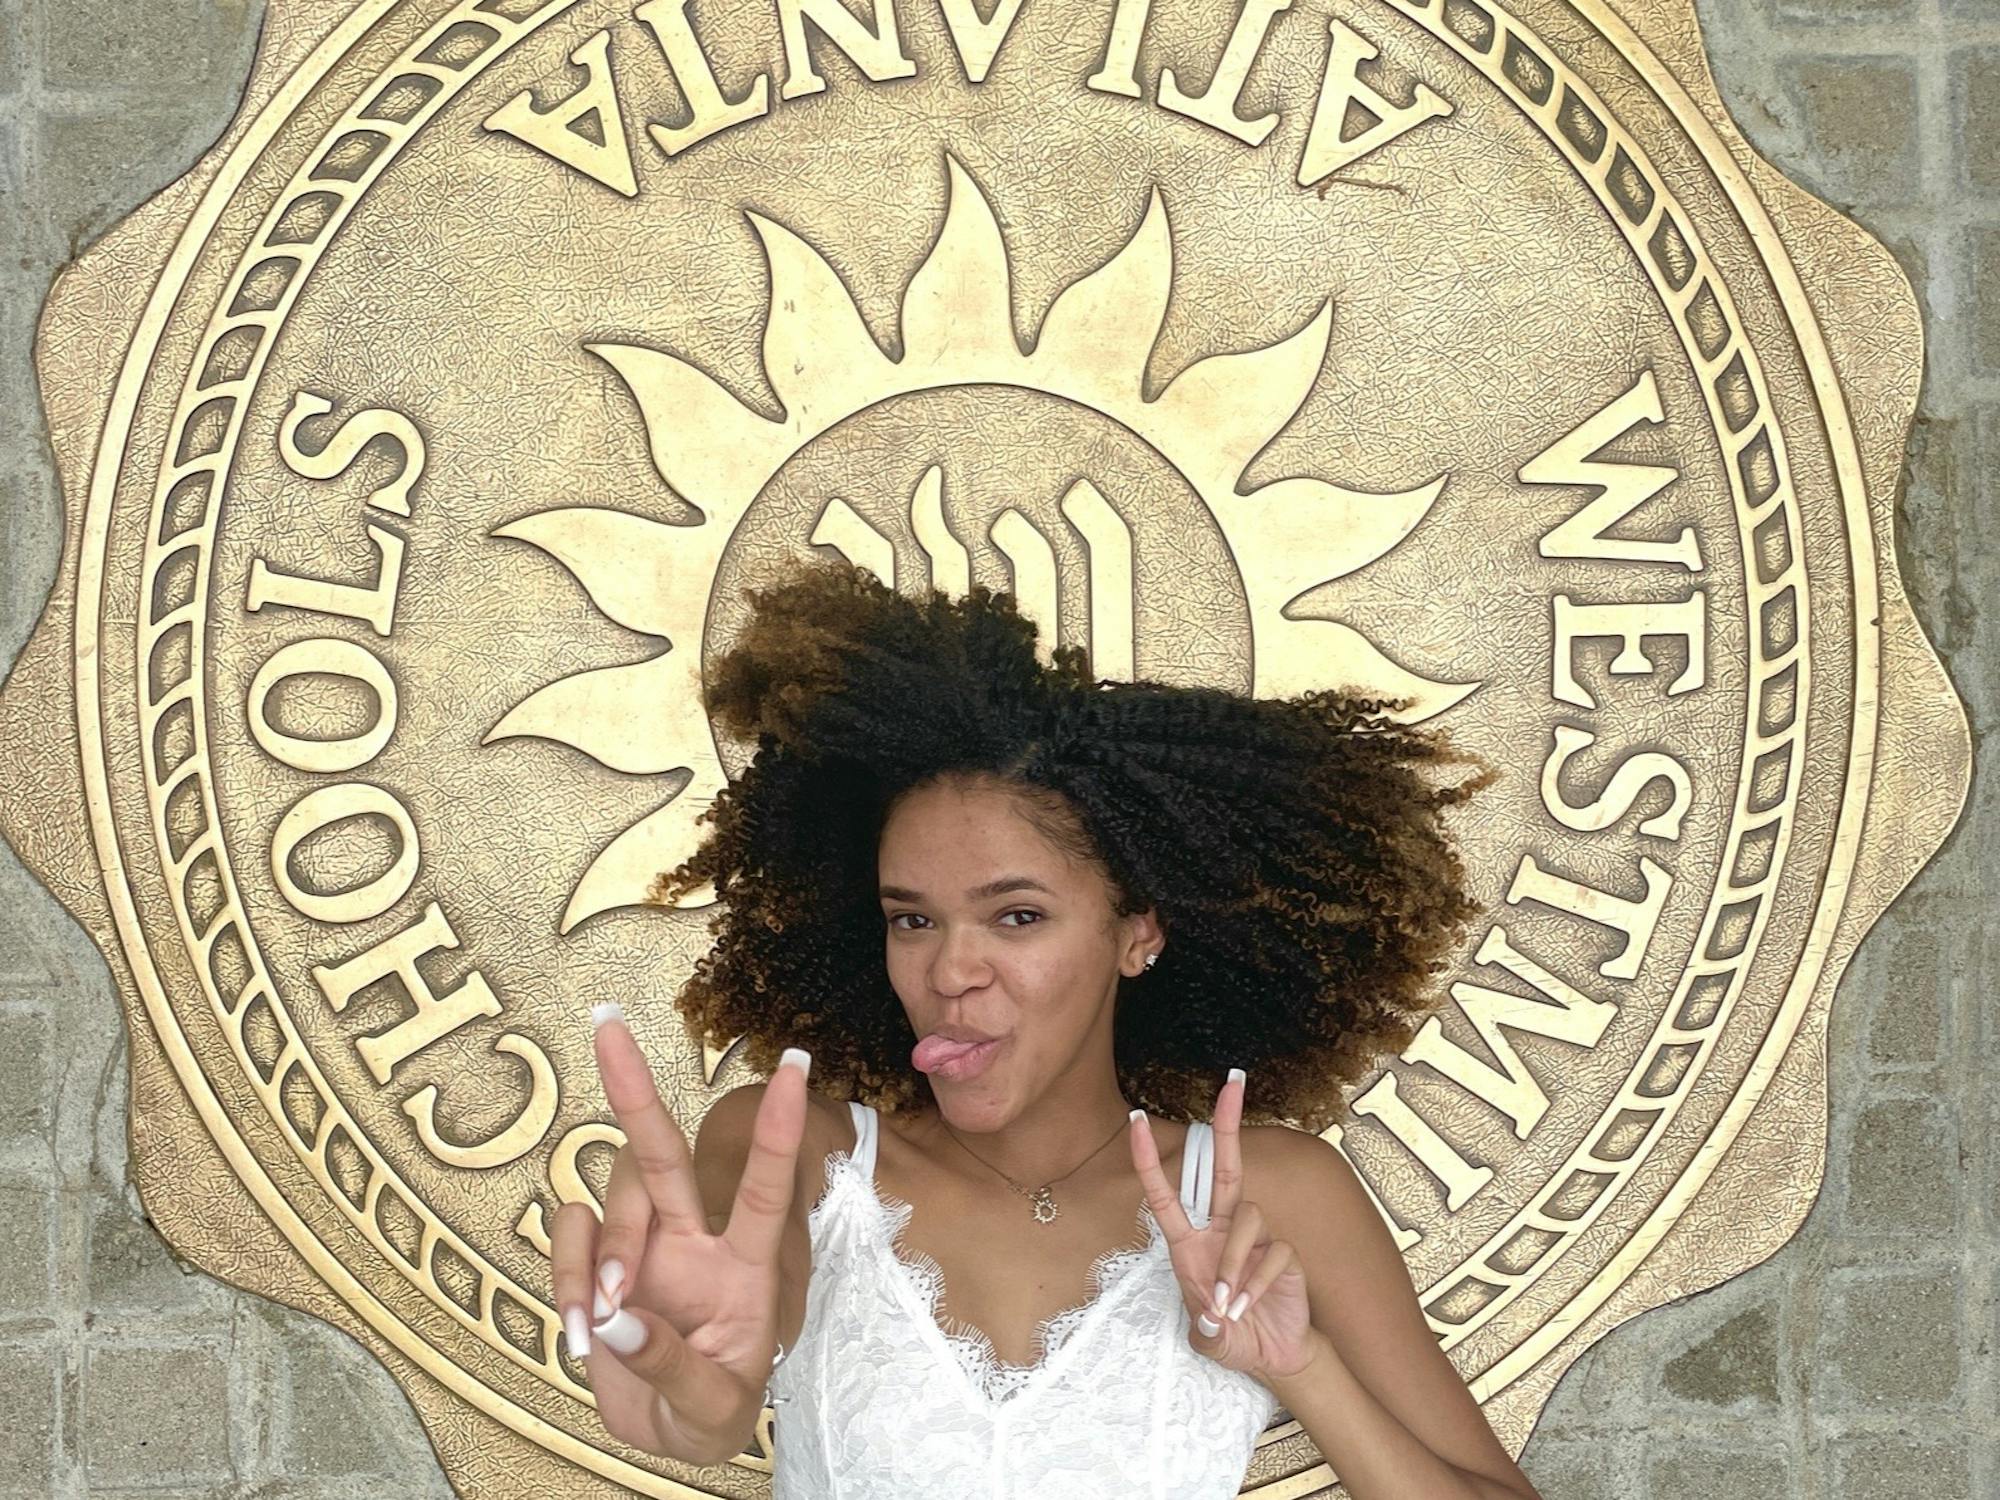 A young woman in a white dress lies on the ground, sticking out her tongue and making a “Fight on!” V with each hand. Over the brick walkway she lies on is a golden metal seal that reads “Westminster Schools Atlanta”